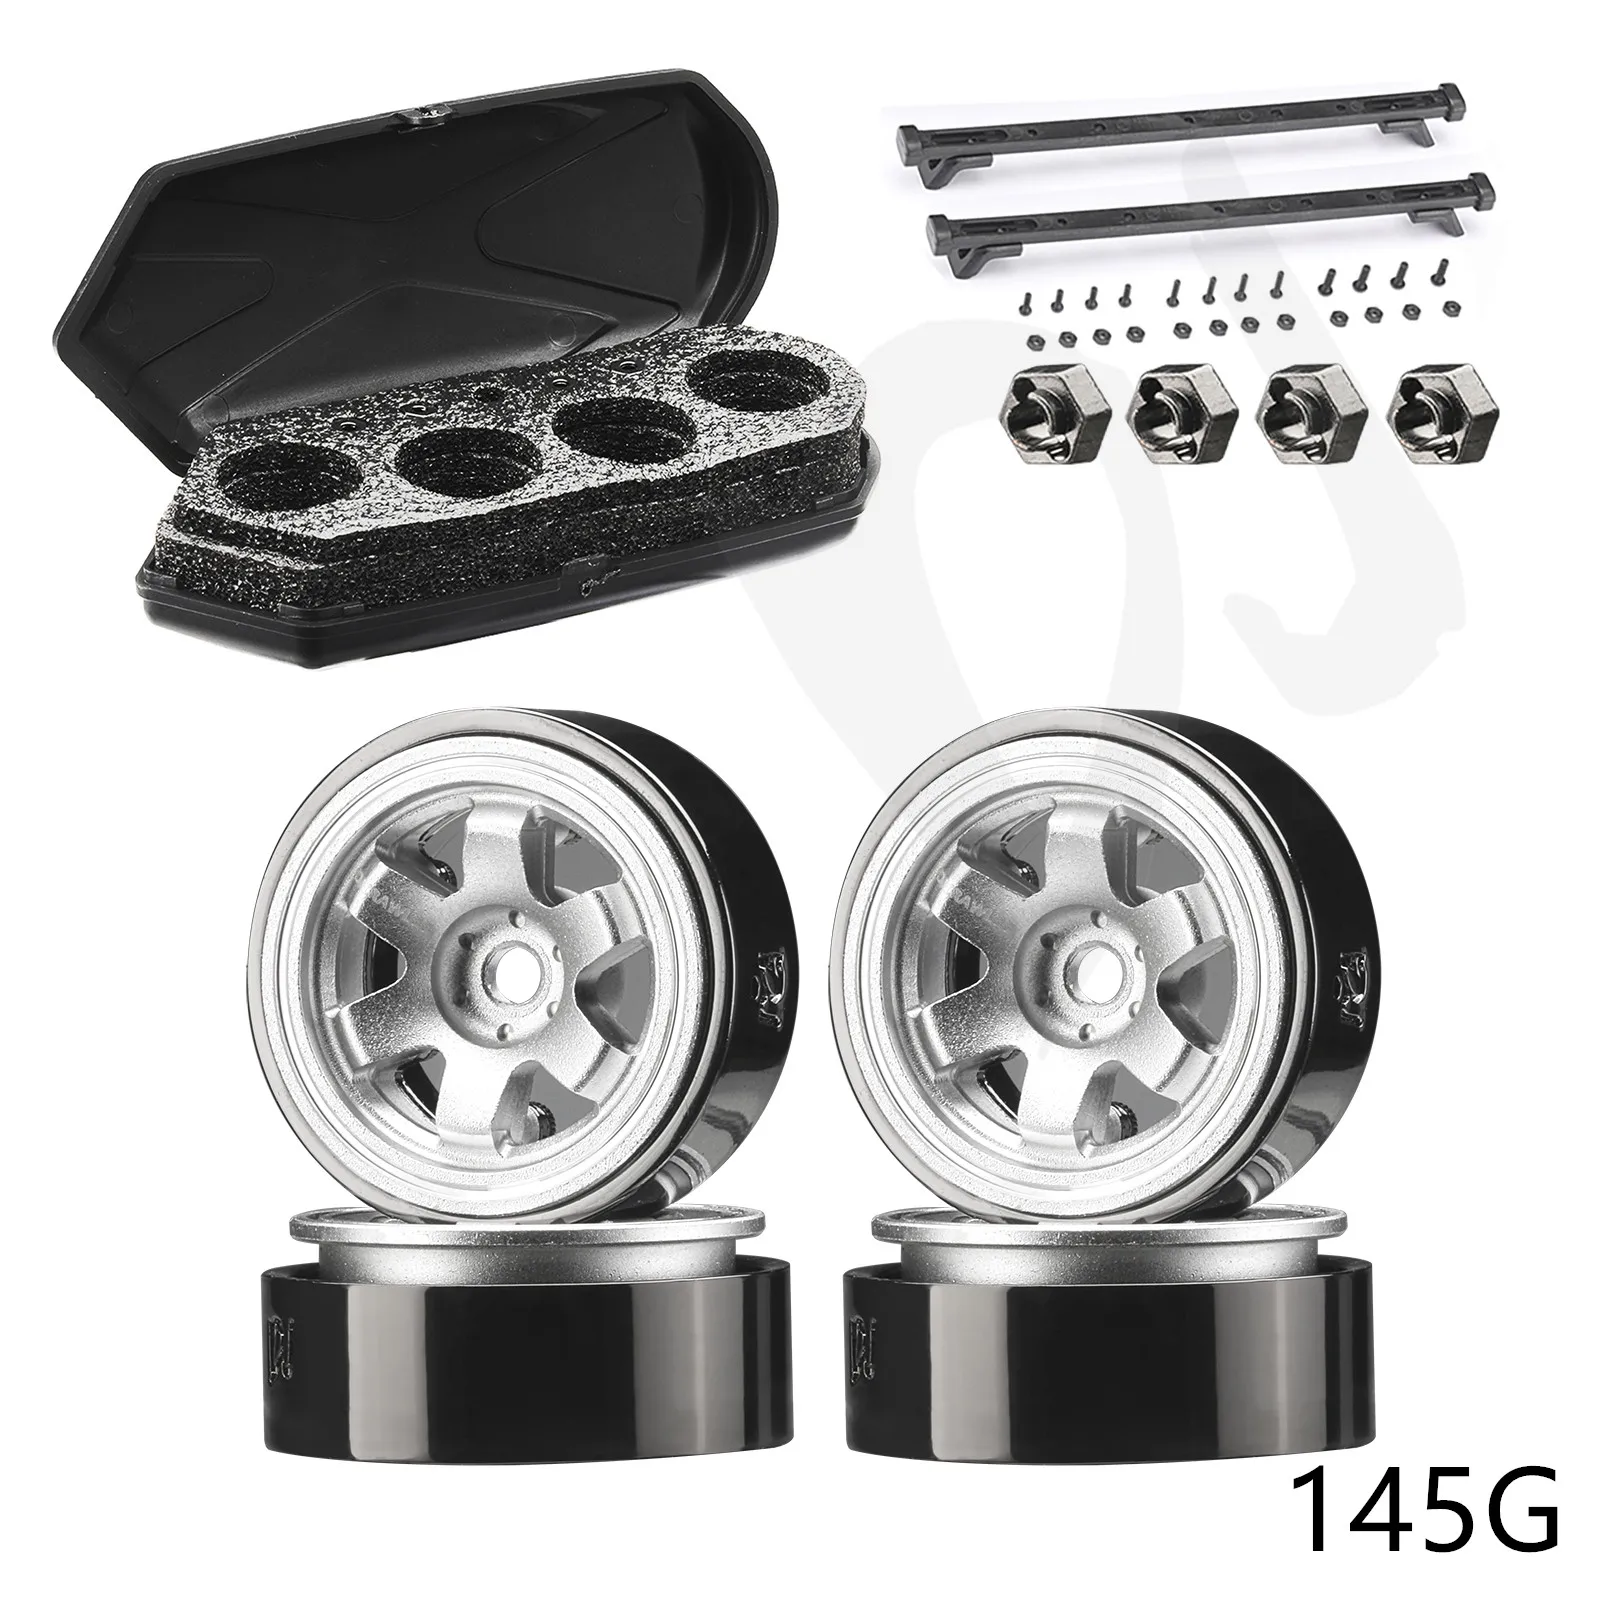 

4pcs For Axial Scx24 Axi T1/t2 Fcx24 Rc Car Upgrade Accessories Parts 1/24 1.0 Te37 Aluminum Alloy Weighted Wheel With Adapters